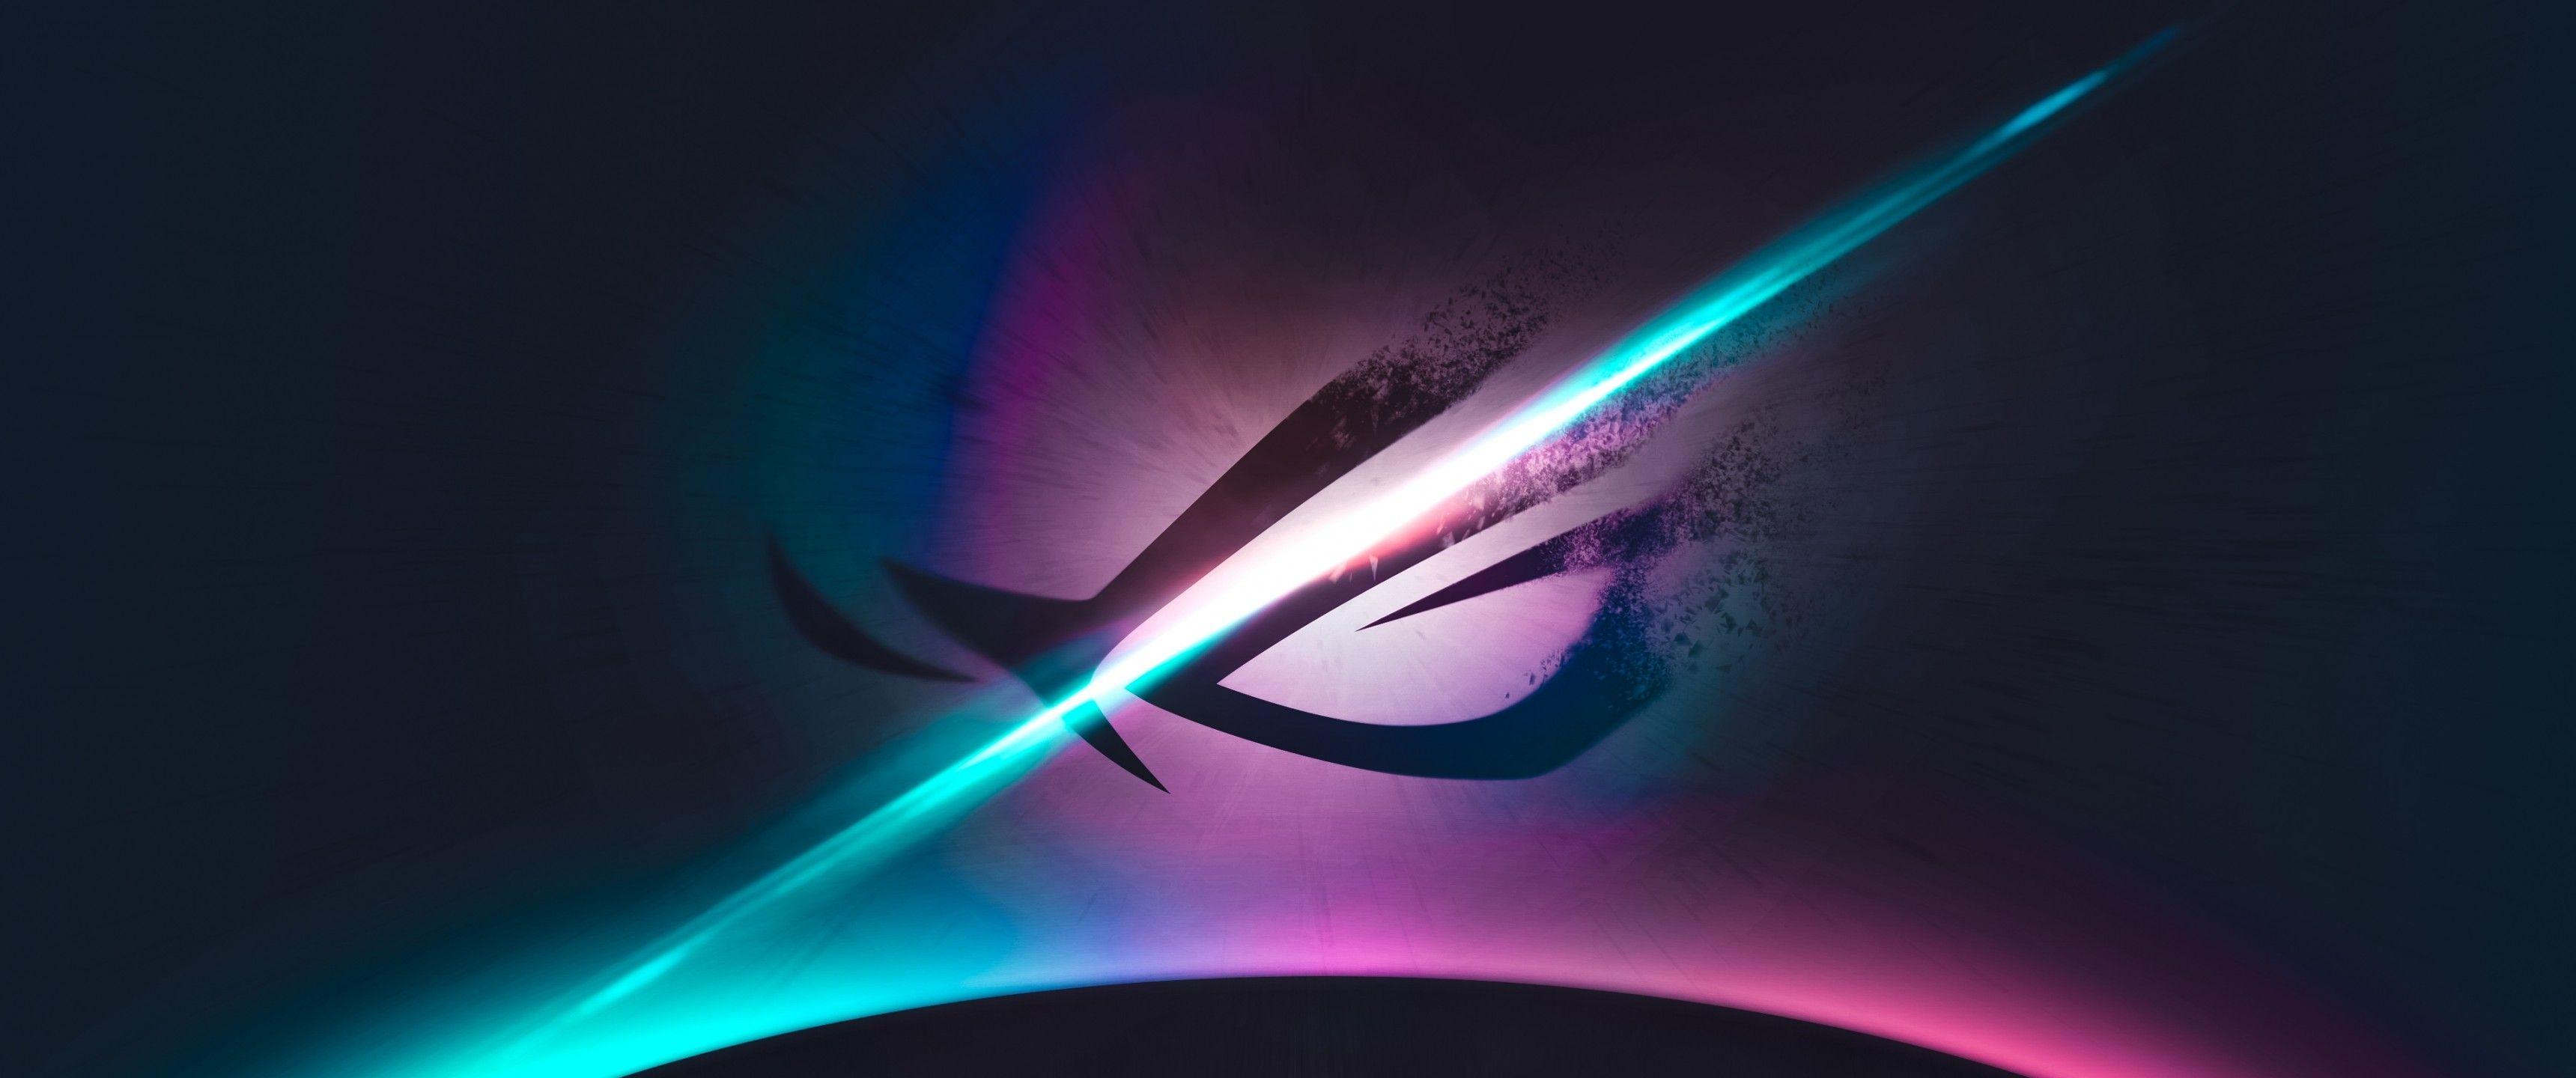 ASUS ROG modified for 3440x1440 WidescreenWallpaper  3440x1440 wallpaper  Lenovo wallpapers Gaming wallpapers hd